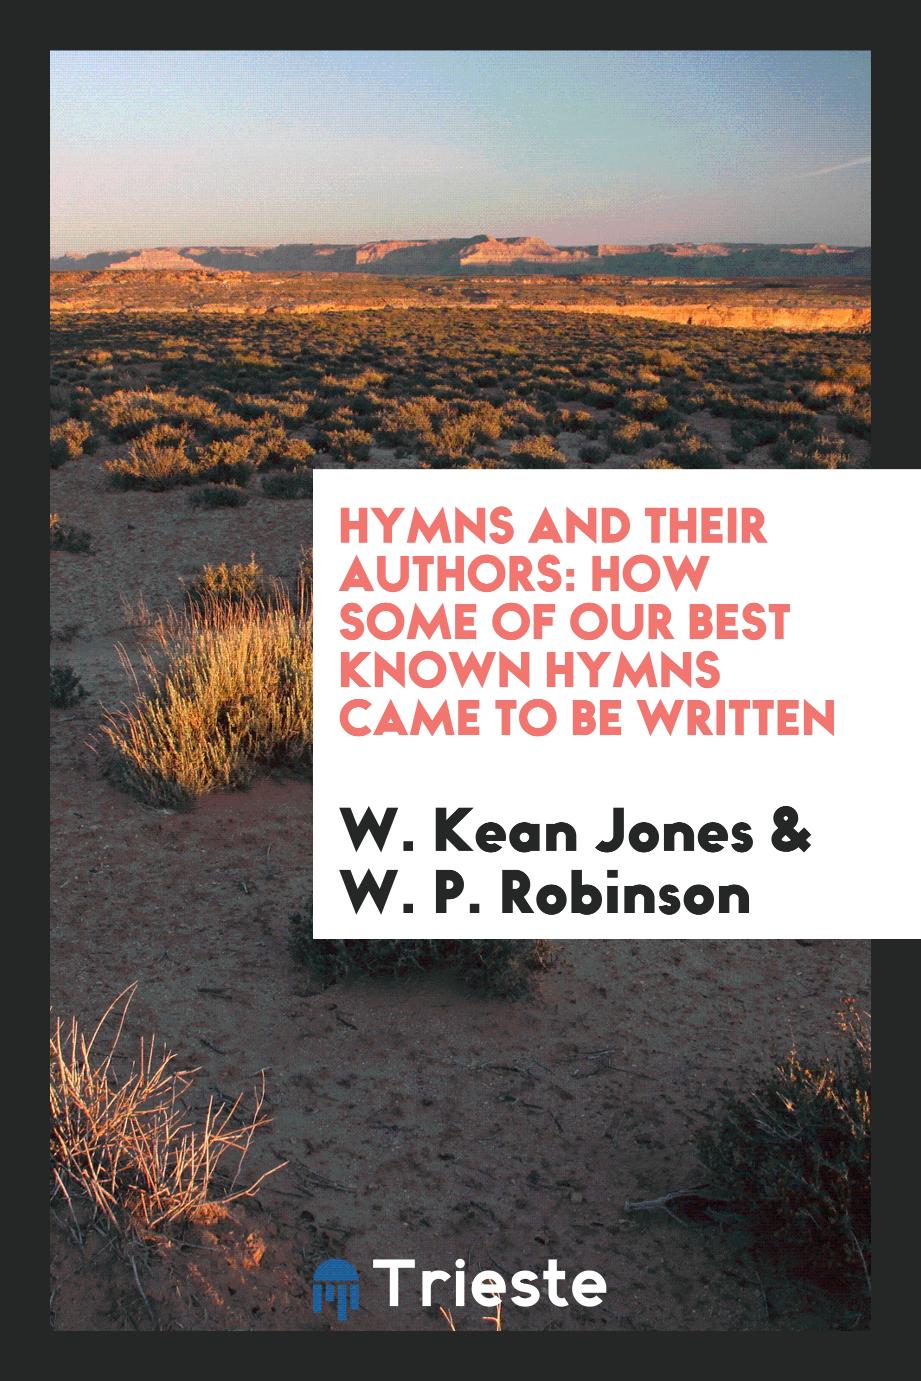 Hymns and their authors: how some of our best known hymns came to be written